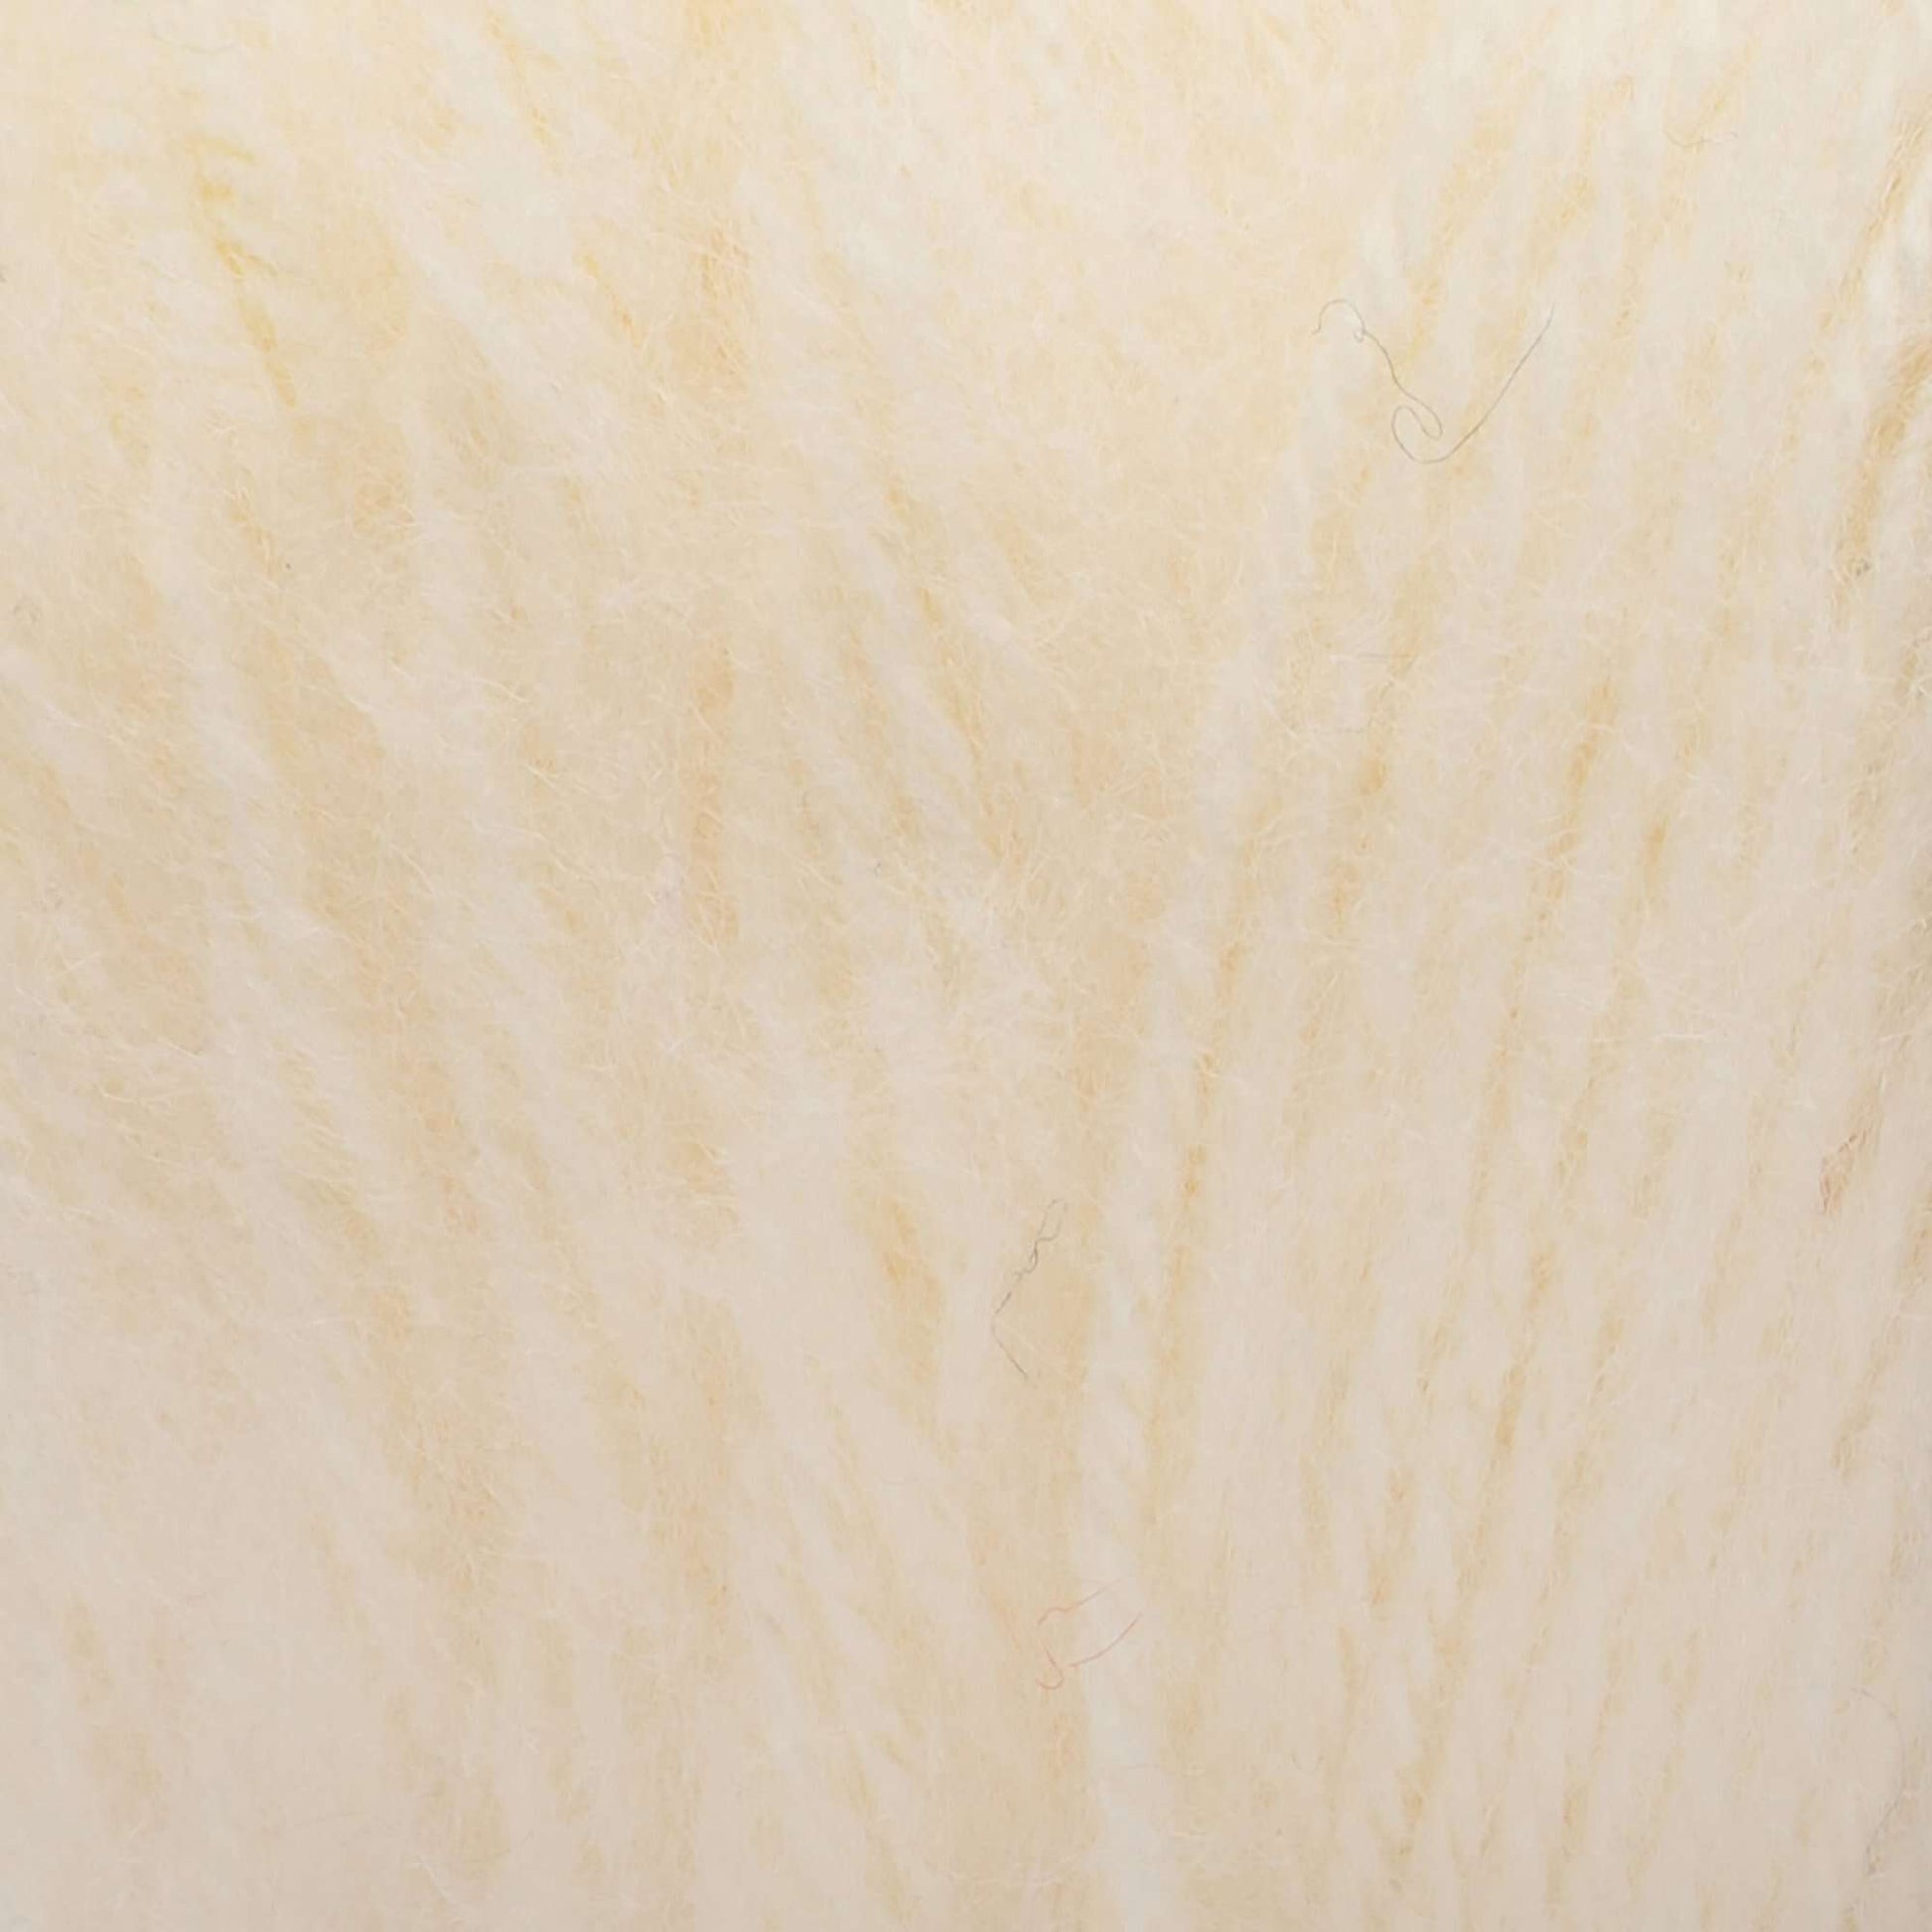 Red Heart® Super Saver - Brushed - Cream (detail)